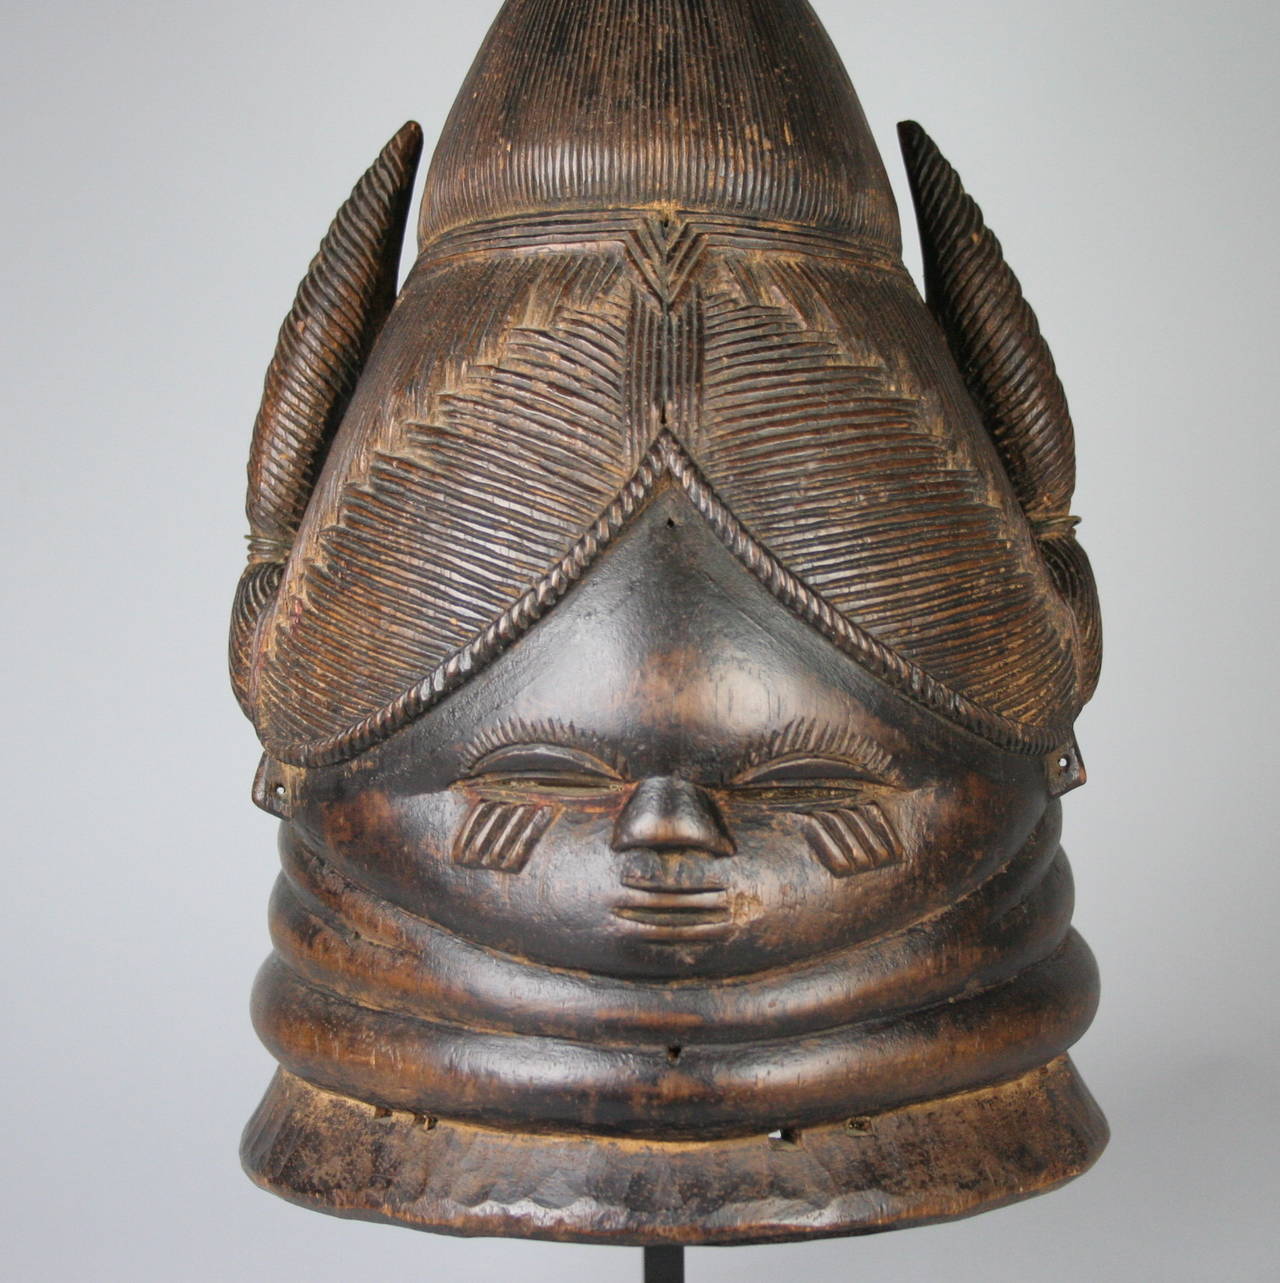 Beautiful and historically fascinating, this tribal Mende mask will make the perfect addition to any collection or home decor scheme. Crafted to represent the idealized woman, it would have been used in initiation ceremonies for young girls entering